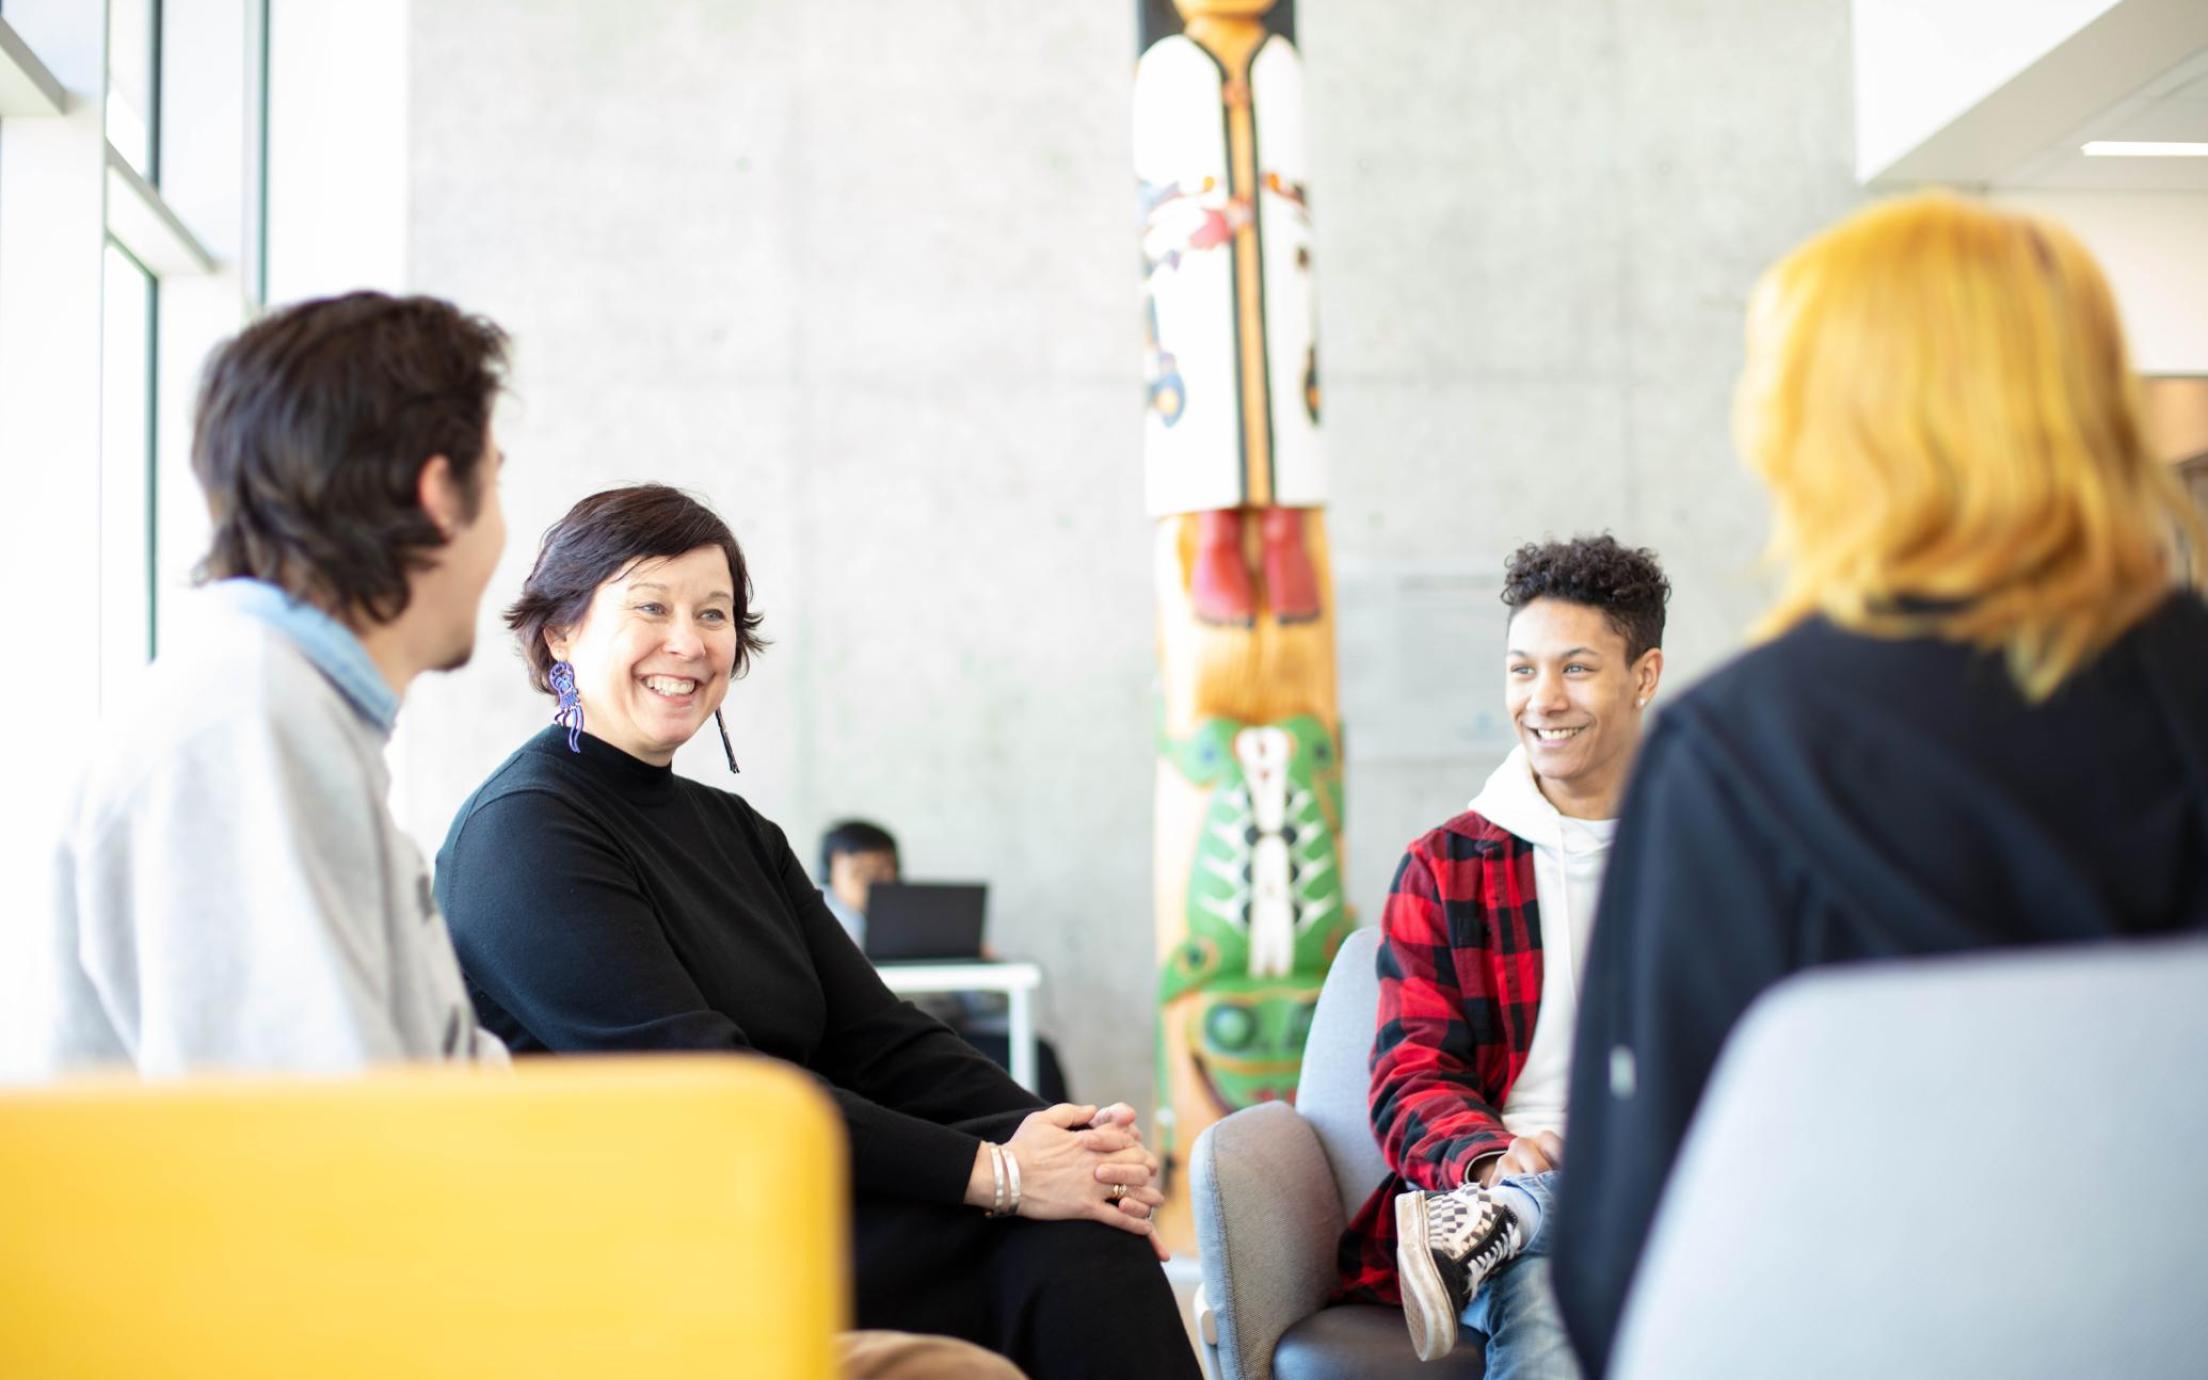 Deborah Saucier interacts with VIU students in the Centre for Health and Science